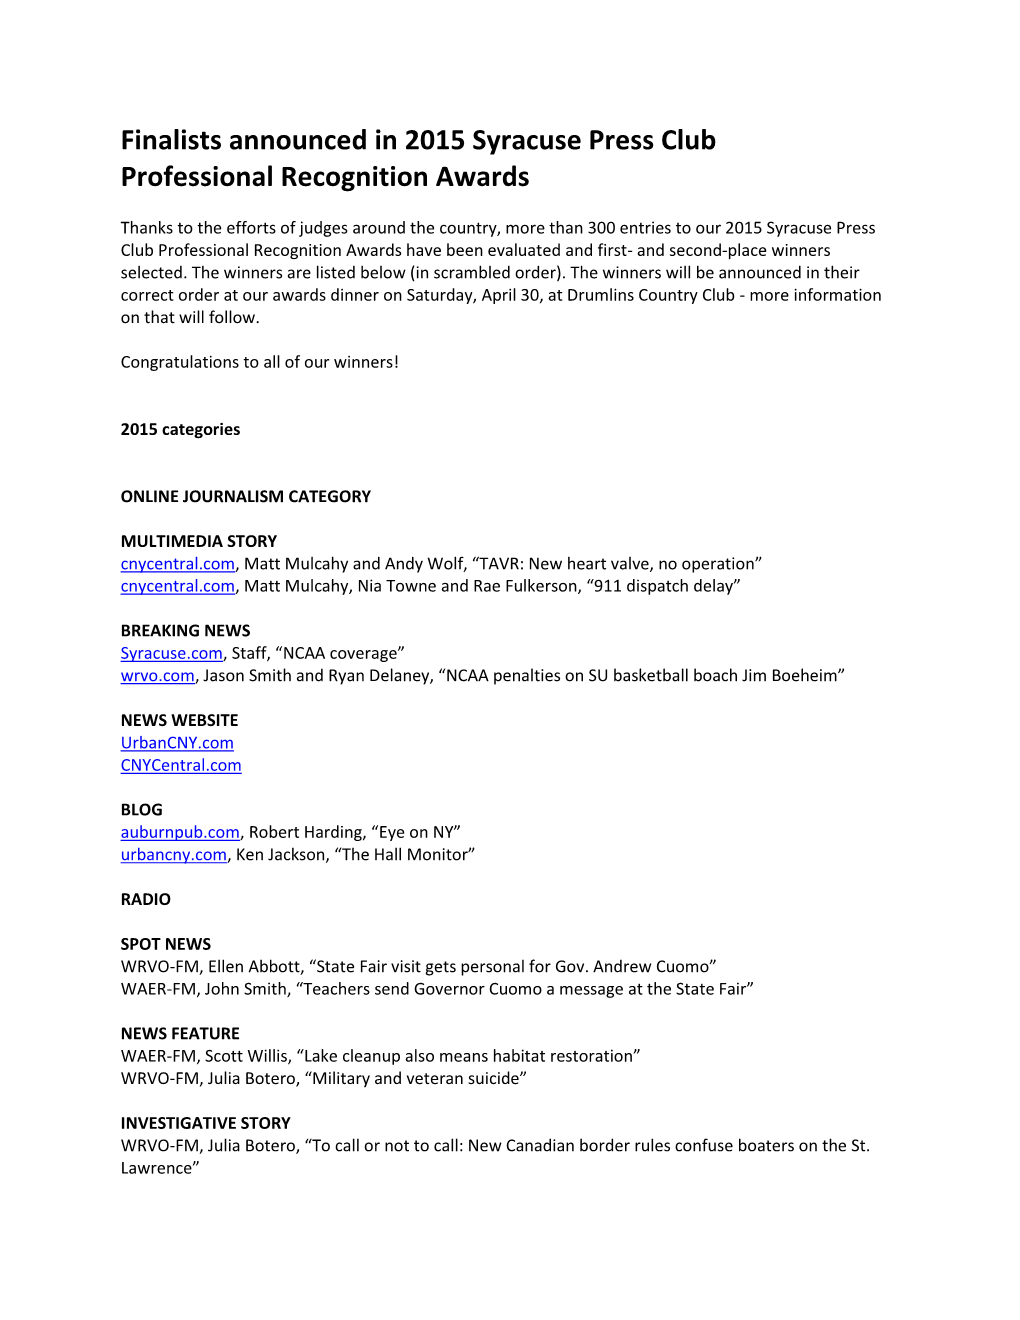 Finalists Announced in 2015 Syracuse Press Club Professional Recognition Awards